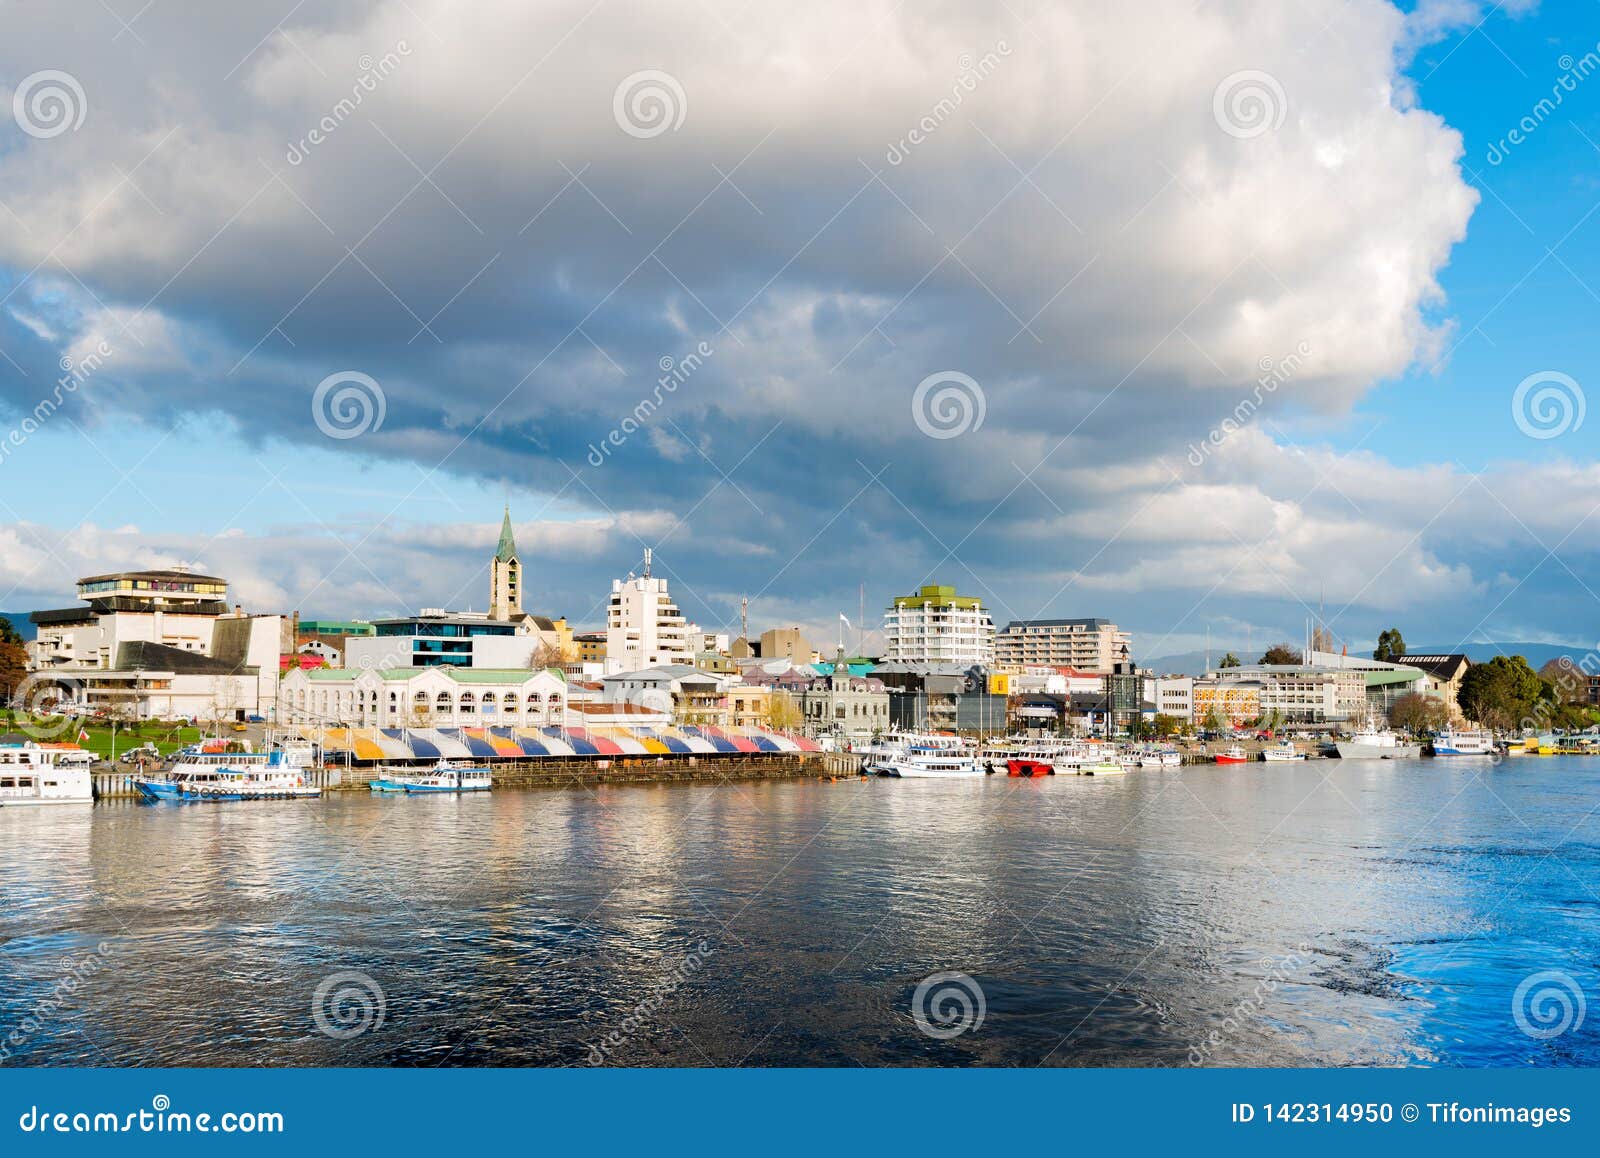 the city of valdivia at the shore of calle-calle river in chile